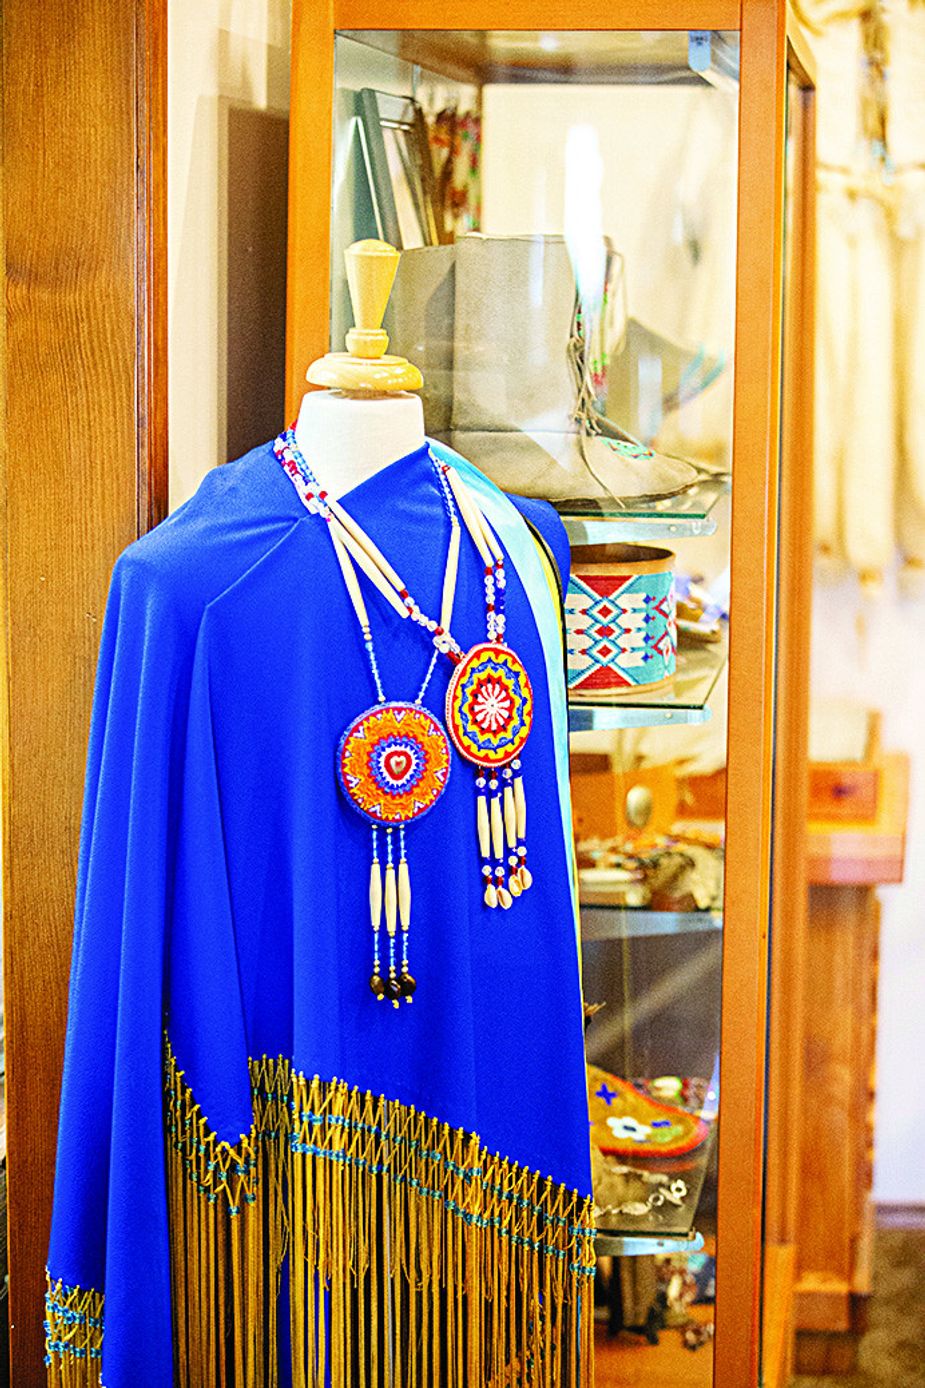 Intriguing items at the Owasso Historical Museum run the gamut from murals to vintage medical supplies to a Kiowa ceremonial dress. Photo by Shane Bevel